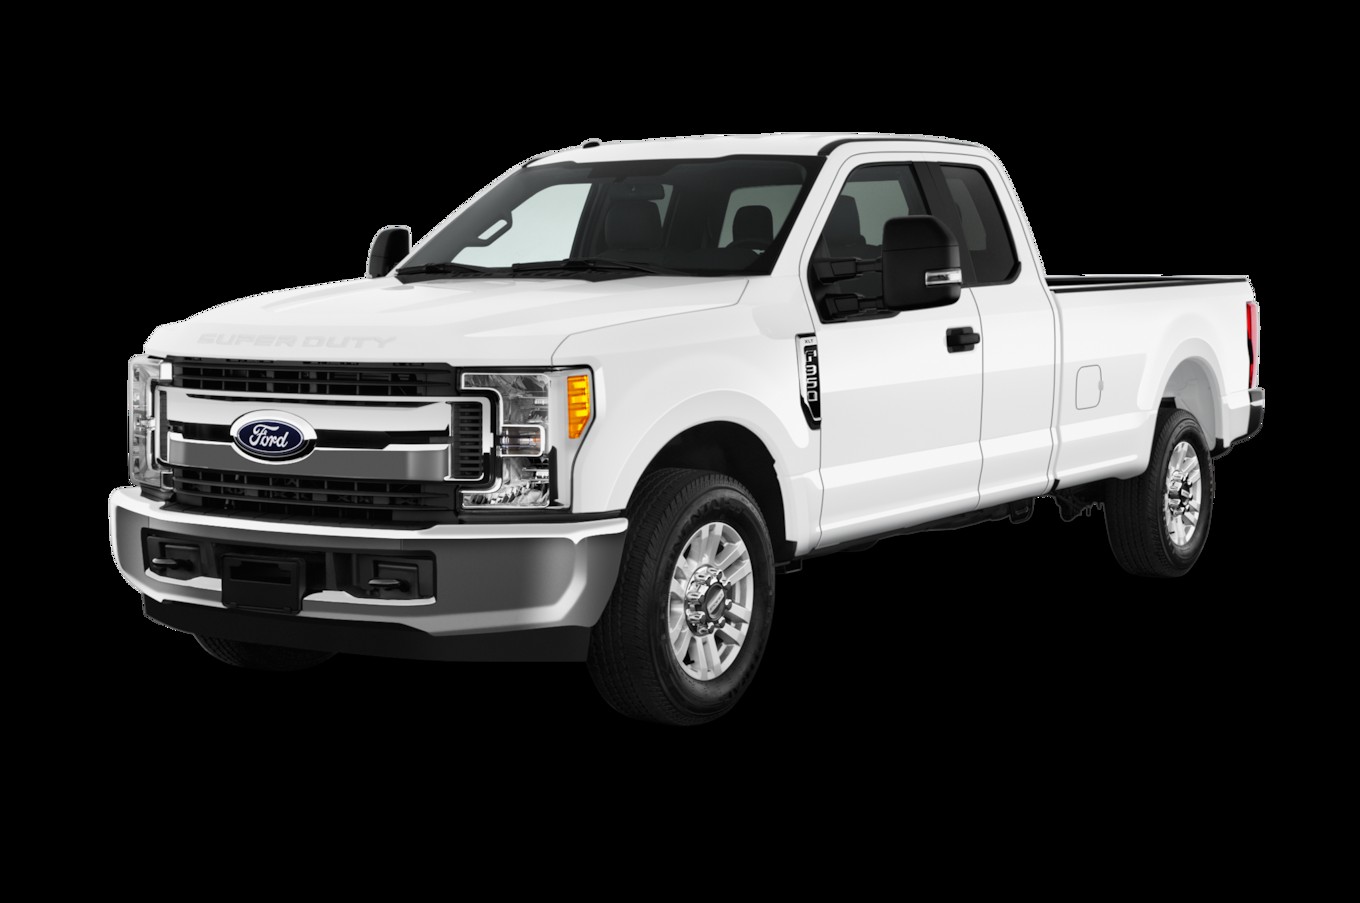 2017 FORD F-350